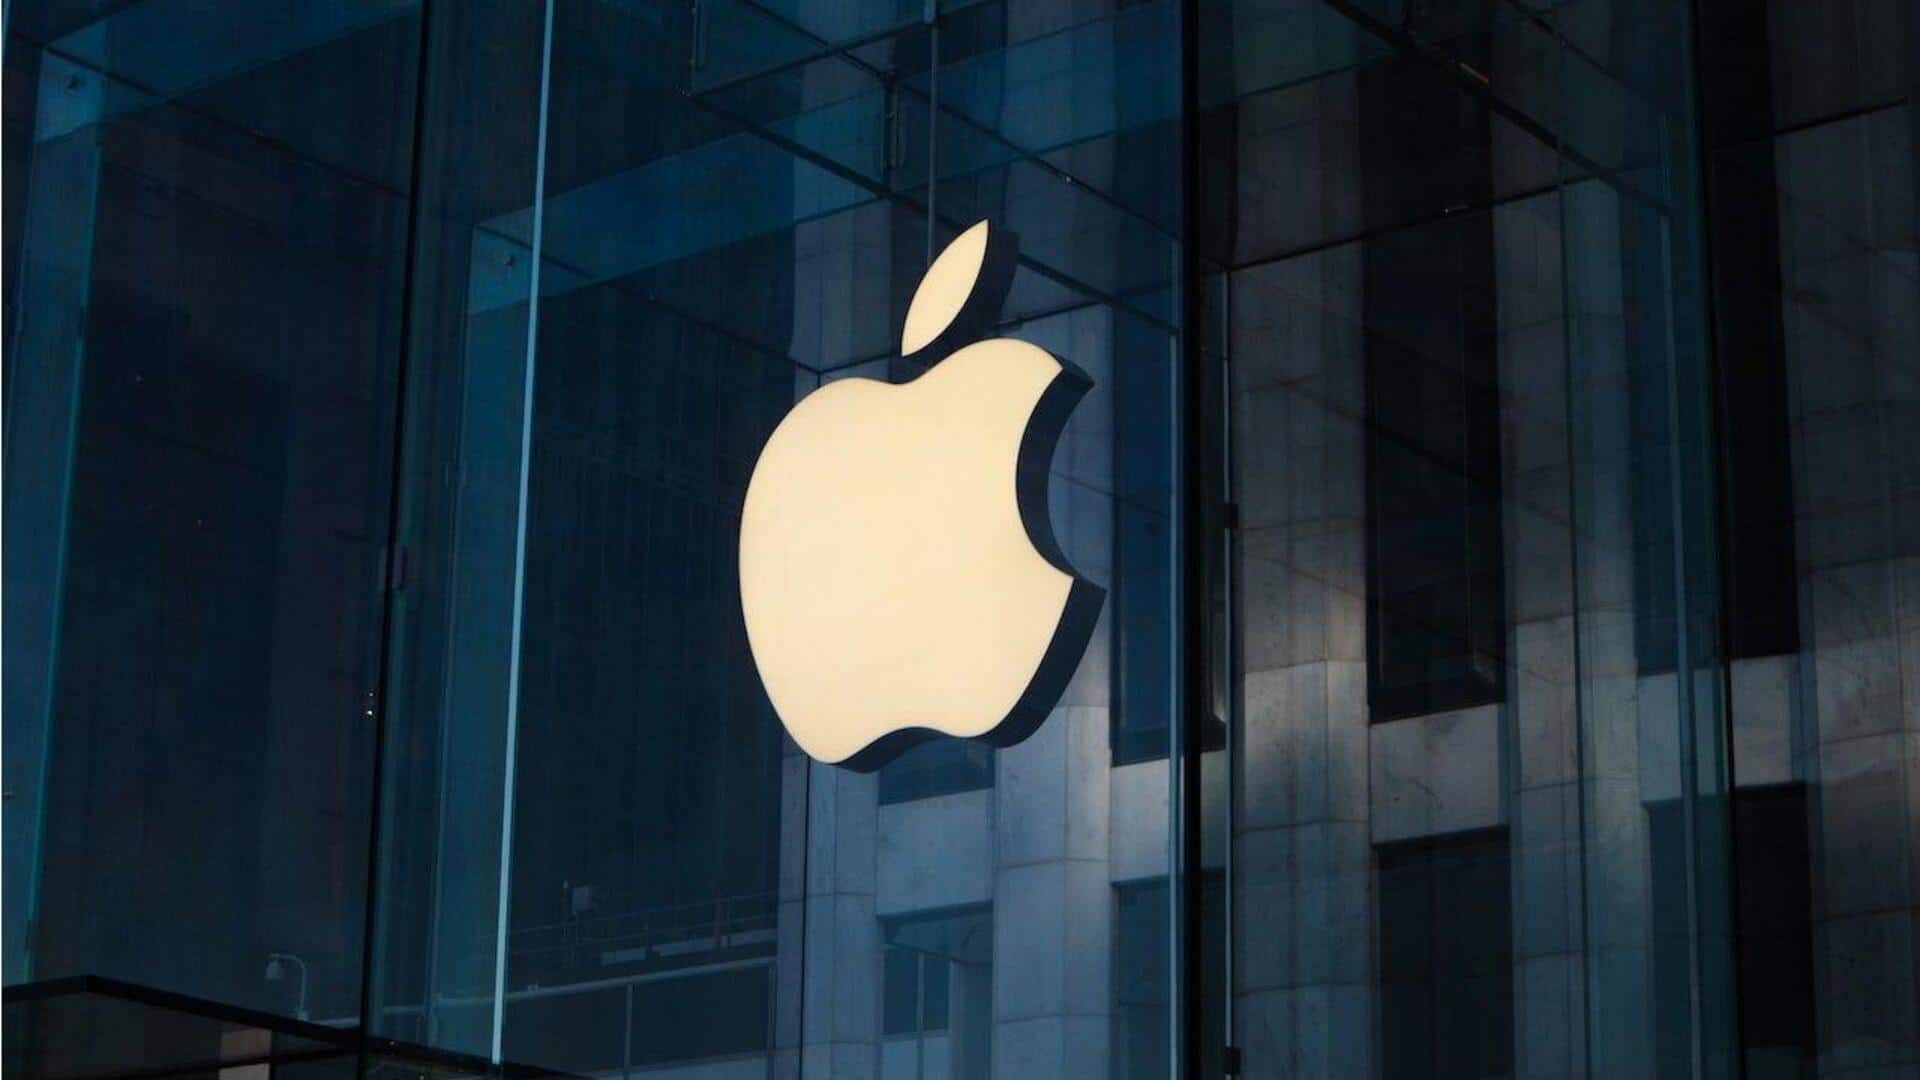 Apple planning to introduce iPhones with bezel-less display: Report